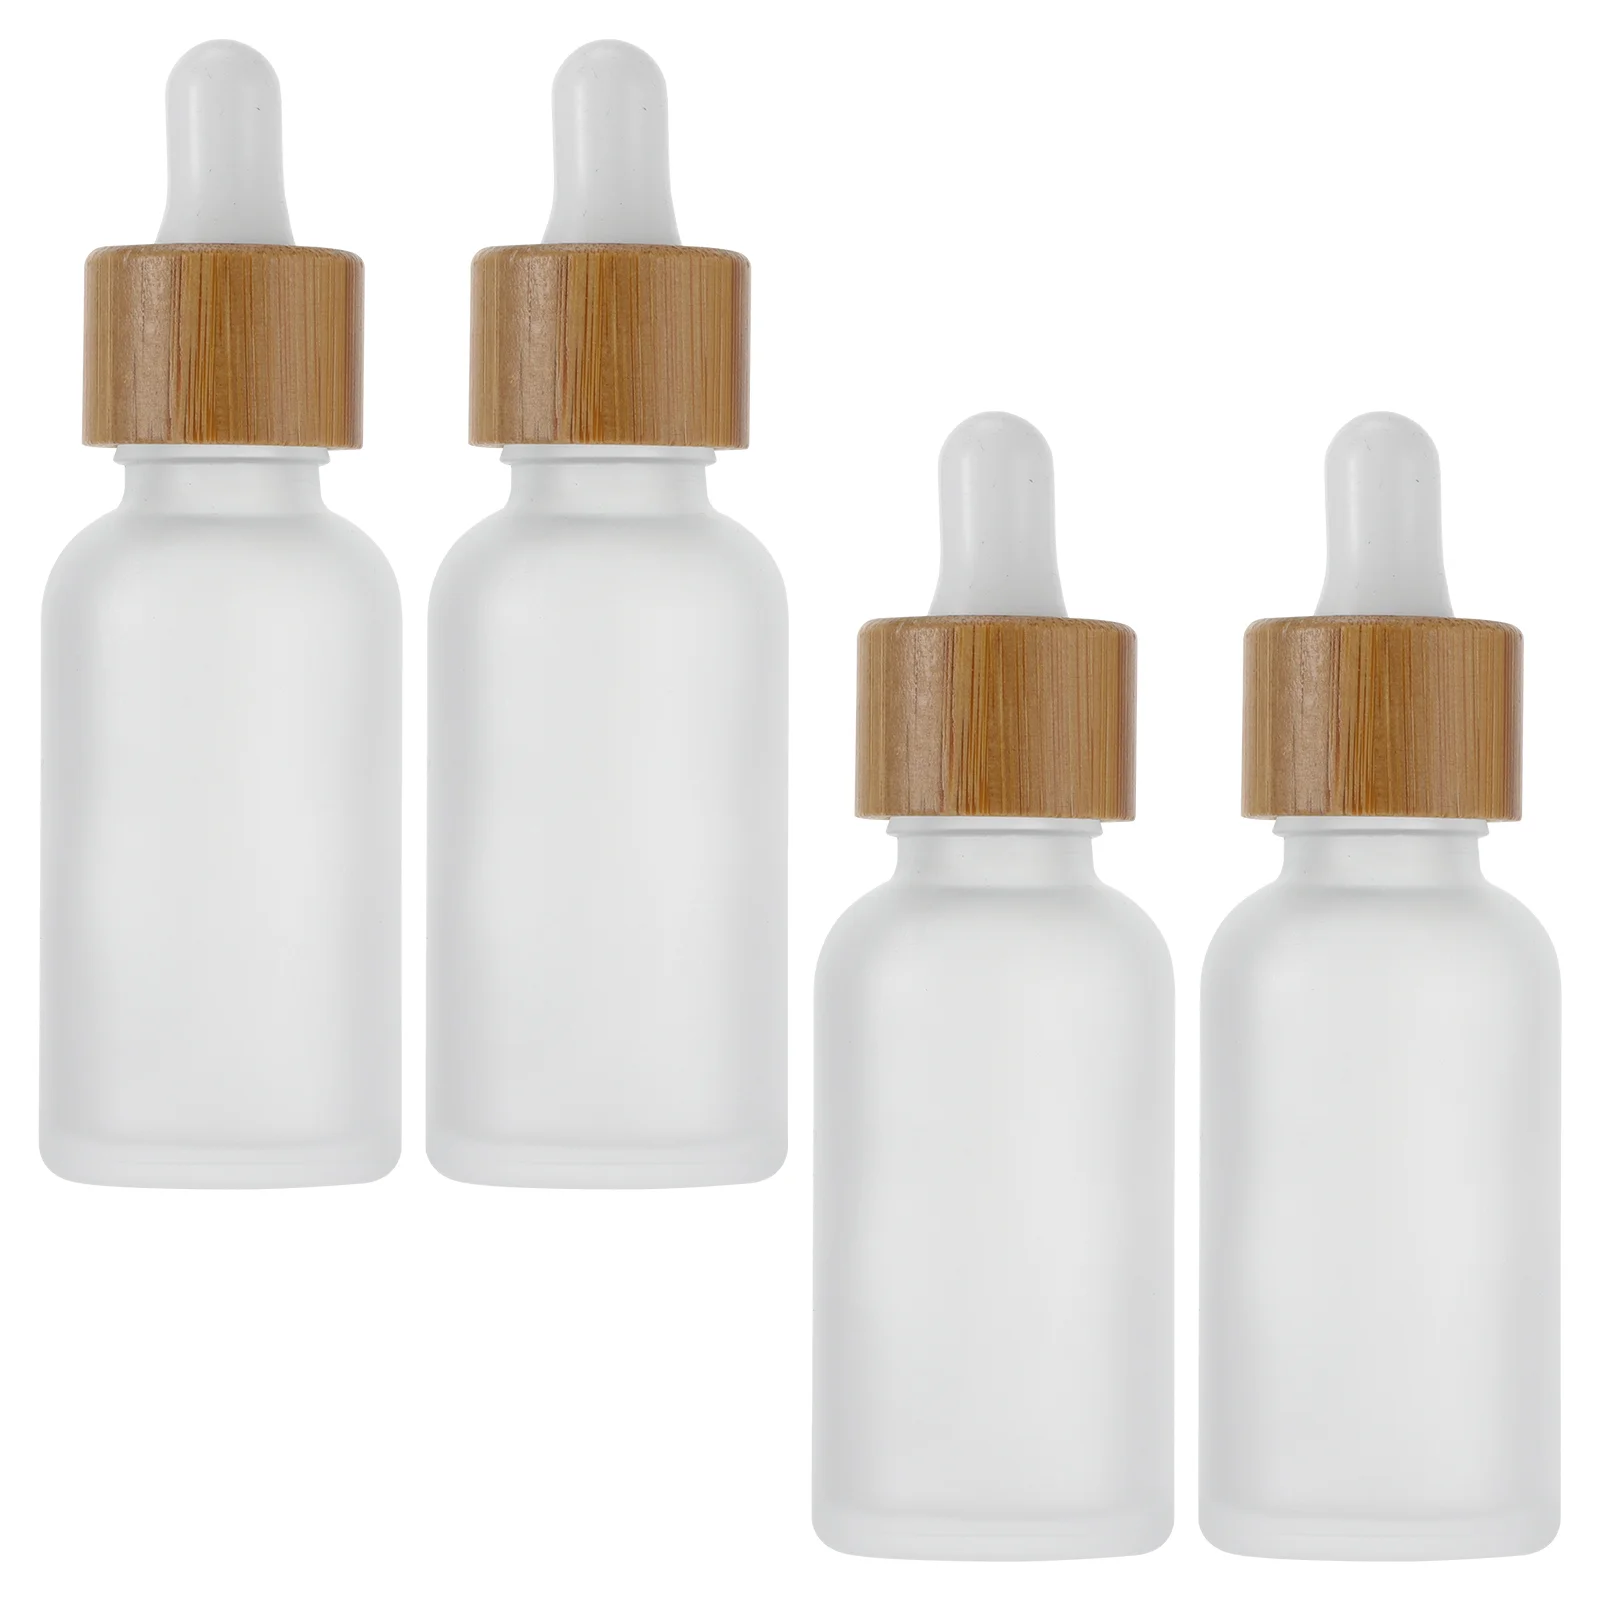 

Travel Dropper Refillable Essential Container Empty Oil Dispenser Containers Clear Sample Eye Liquid Droppers Drip Oils Makeup